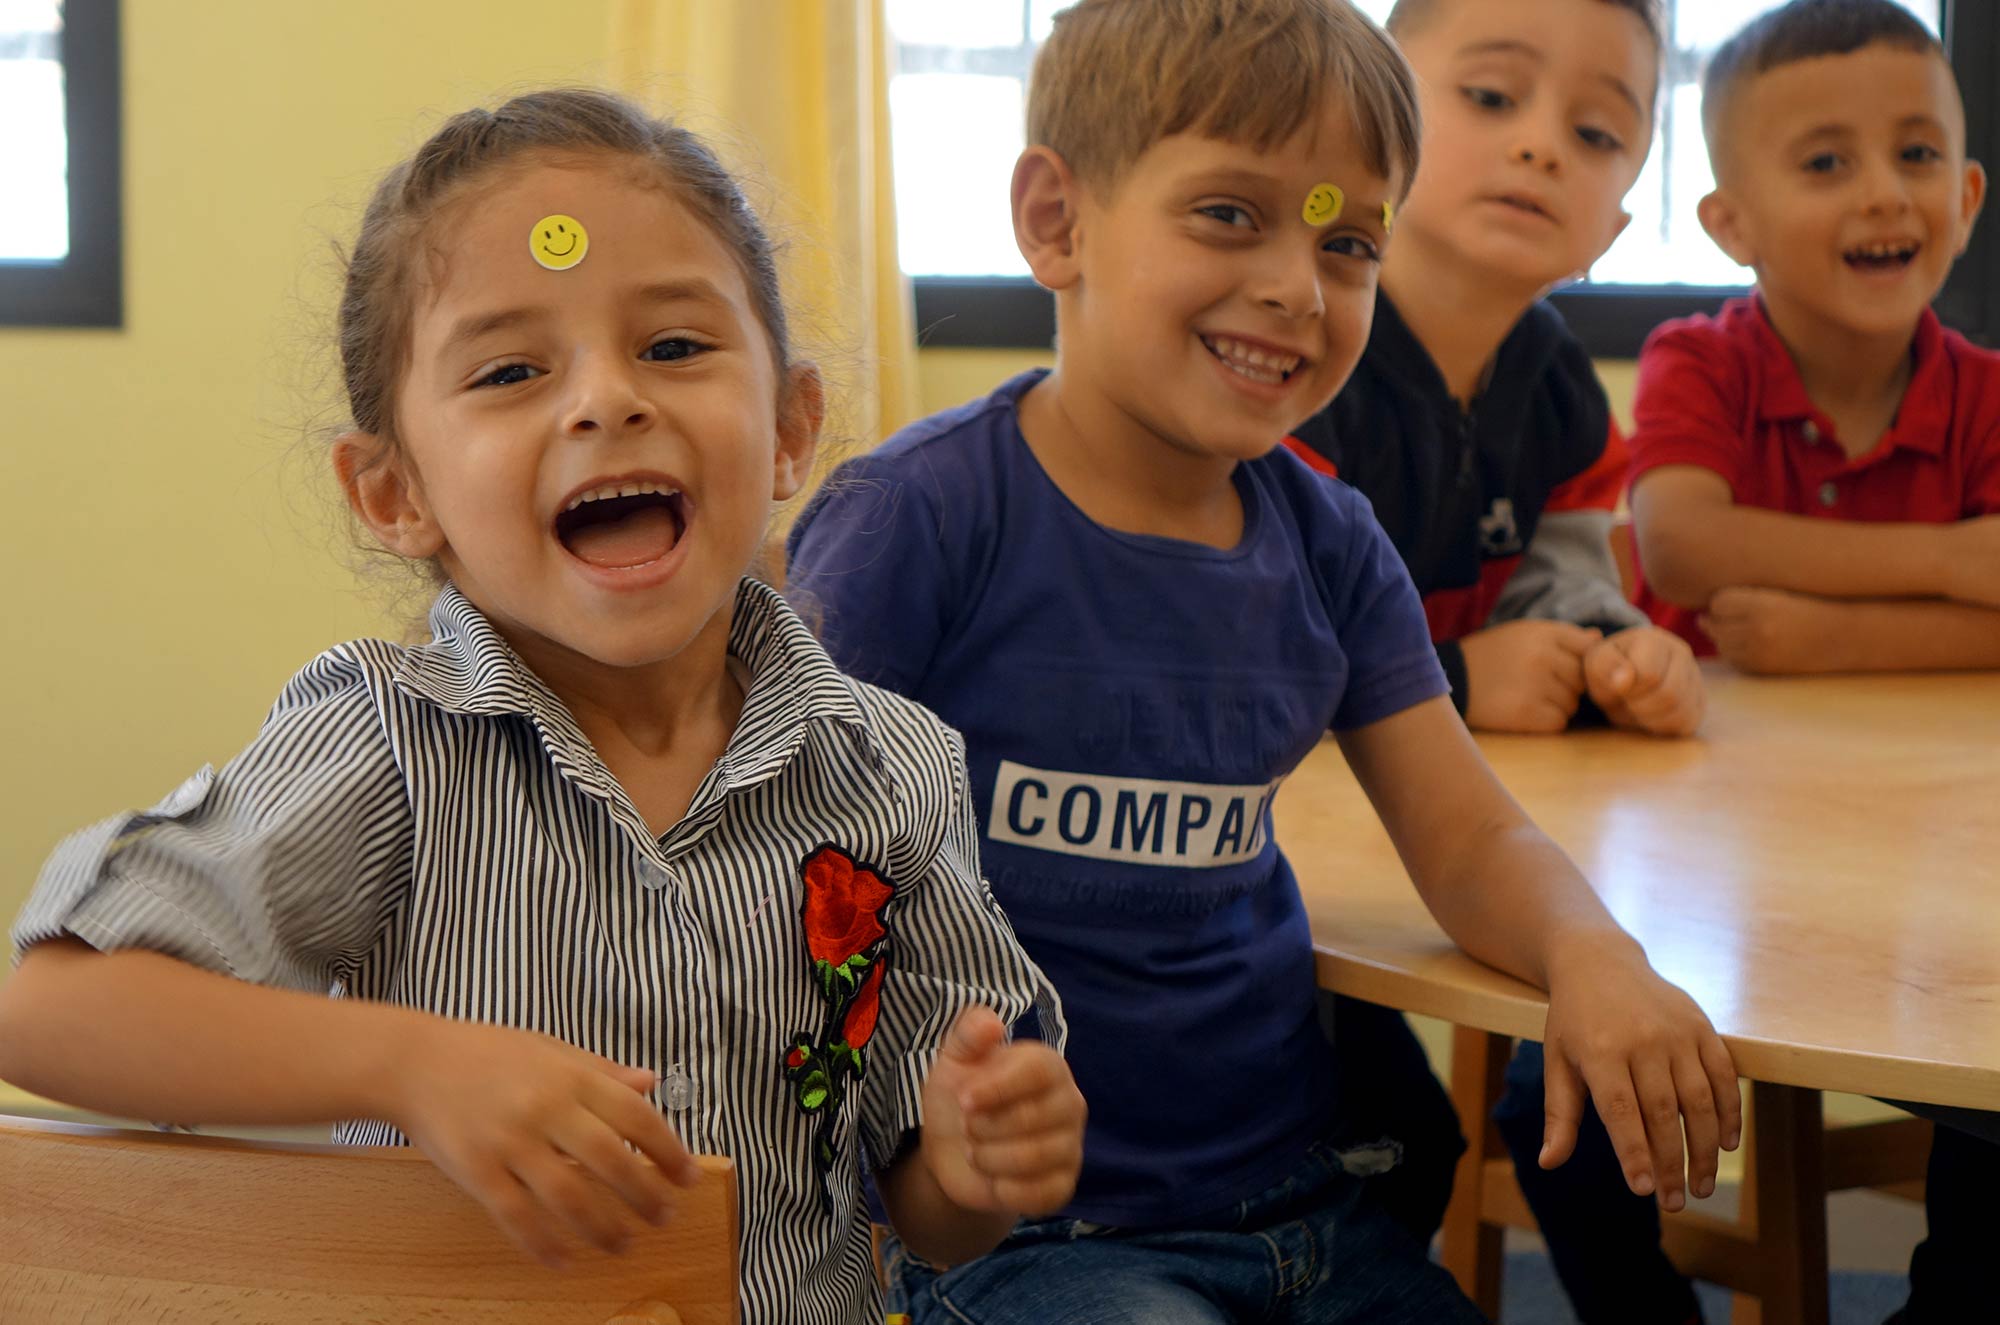 Preschoolers share a laugh in the West Bank village of Qibya, which now has a public preschool.